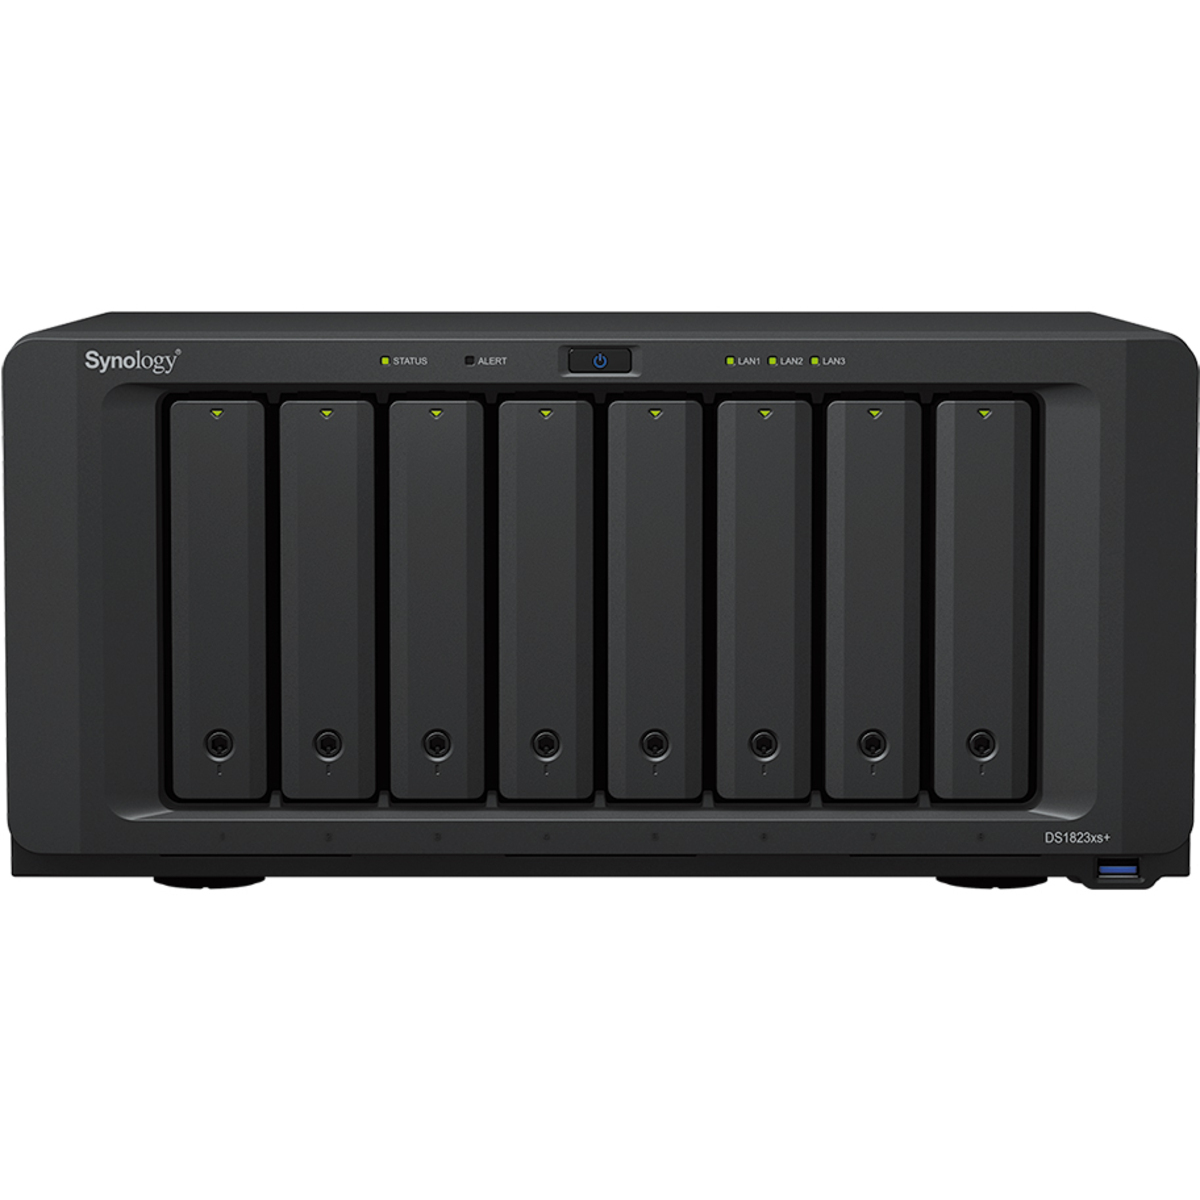 Synology DiskStation DS1823xs+ 100tb 8-Bay Desktop Multimedia / Power User / Business NAS - Network Attached Storage Device 5x20tb Western Digital Red Pro WD201KFGX 3.5 7200rpm SATA 6Gb/s HDD NAS Class Drives Installed - Burn-In Tested DiskStation DS1823xs+